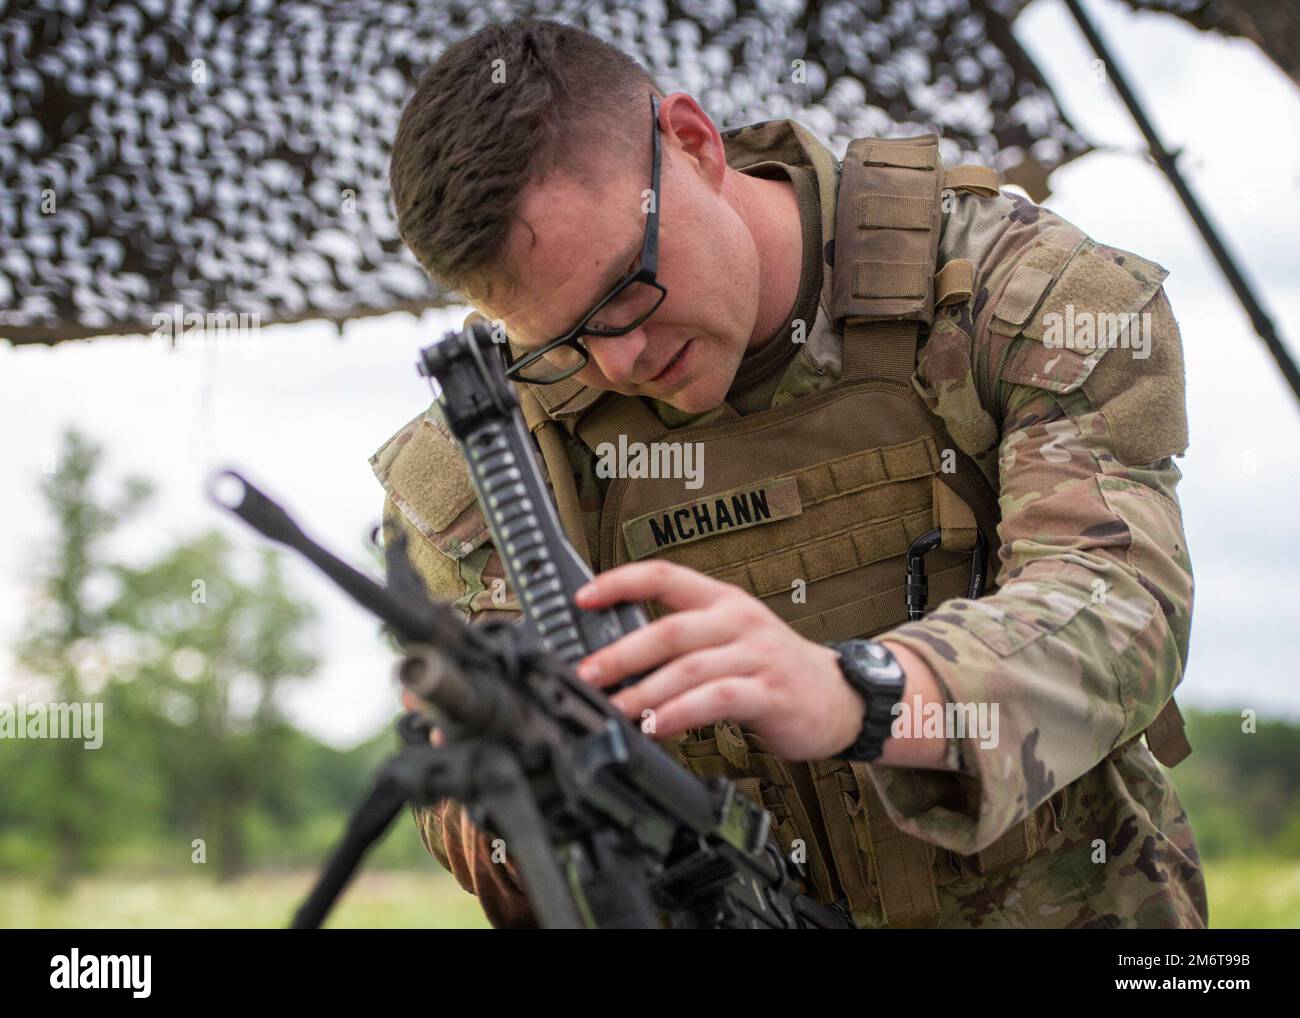 Sgt. Christopher McHann, Regional Training Institute, Texas Army National Guard, is timed as he breaks down and re-assembles a M249 Squad Automatic Weapon (SAW), during the Best Warrior Competition at Camp Swift, May 5, 2022. The three-day competition challenges service members on professional military knowledge, marksmanship, obstacle course and land navigation. The Army winners of this event will move on to represent Texas at the National Guard’s Region V Best Warrior Competition. Texas Army National Guard photo by Sgt. 1st Class Mark Scovell Stock Photo